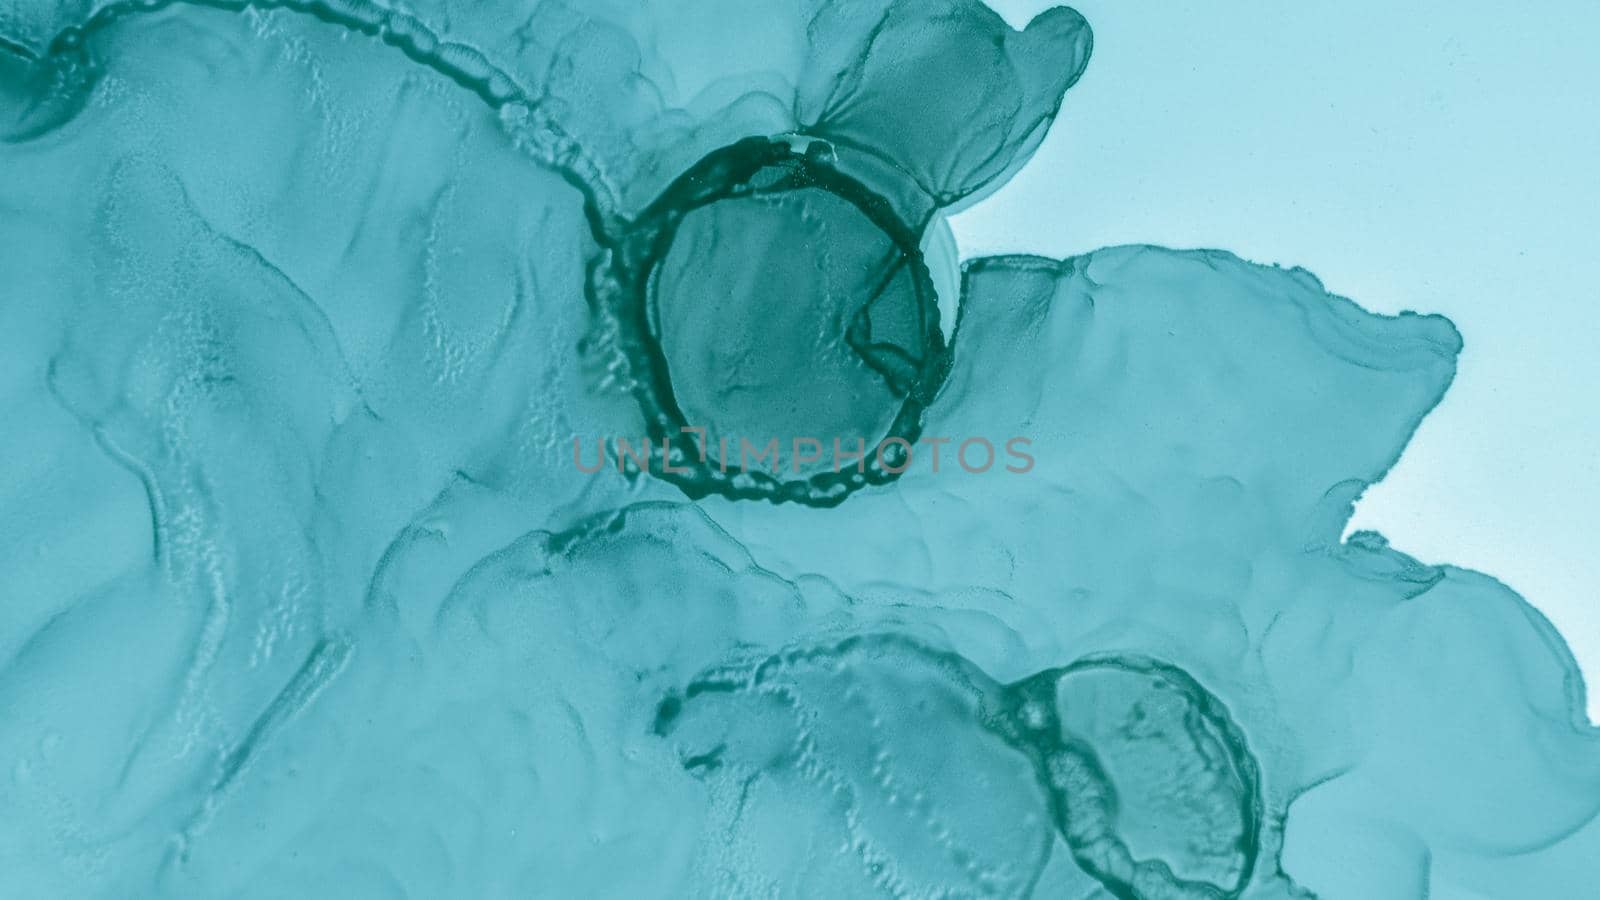 Pastel Fluid Water. Blue Cloud Fashion Abstraction. Contemporary Paint Background. Alcohol Inks Texture. Watercolor Paint Wallpaper. Teal Pastel Flow Design. Blue Ocean Creative Abstraction.